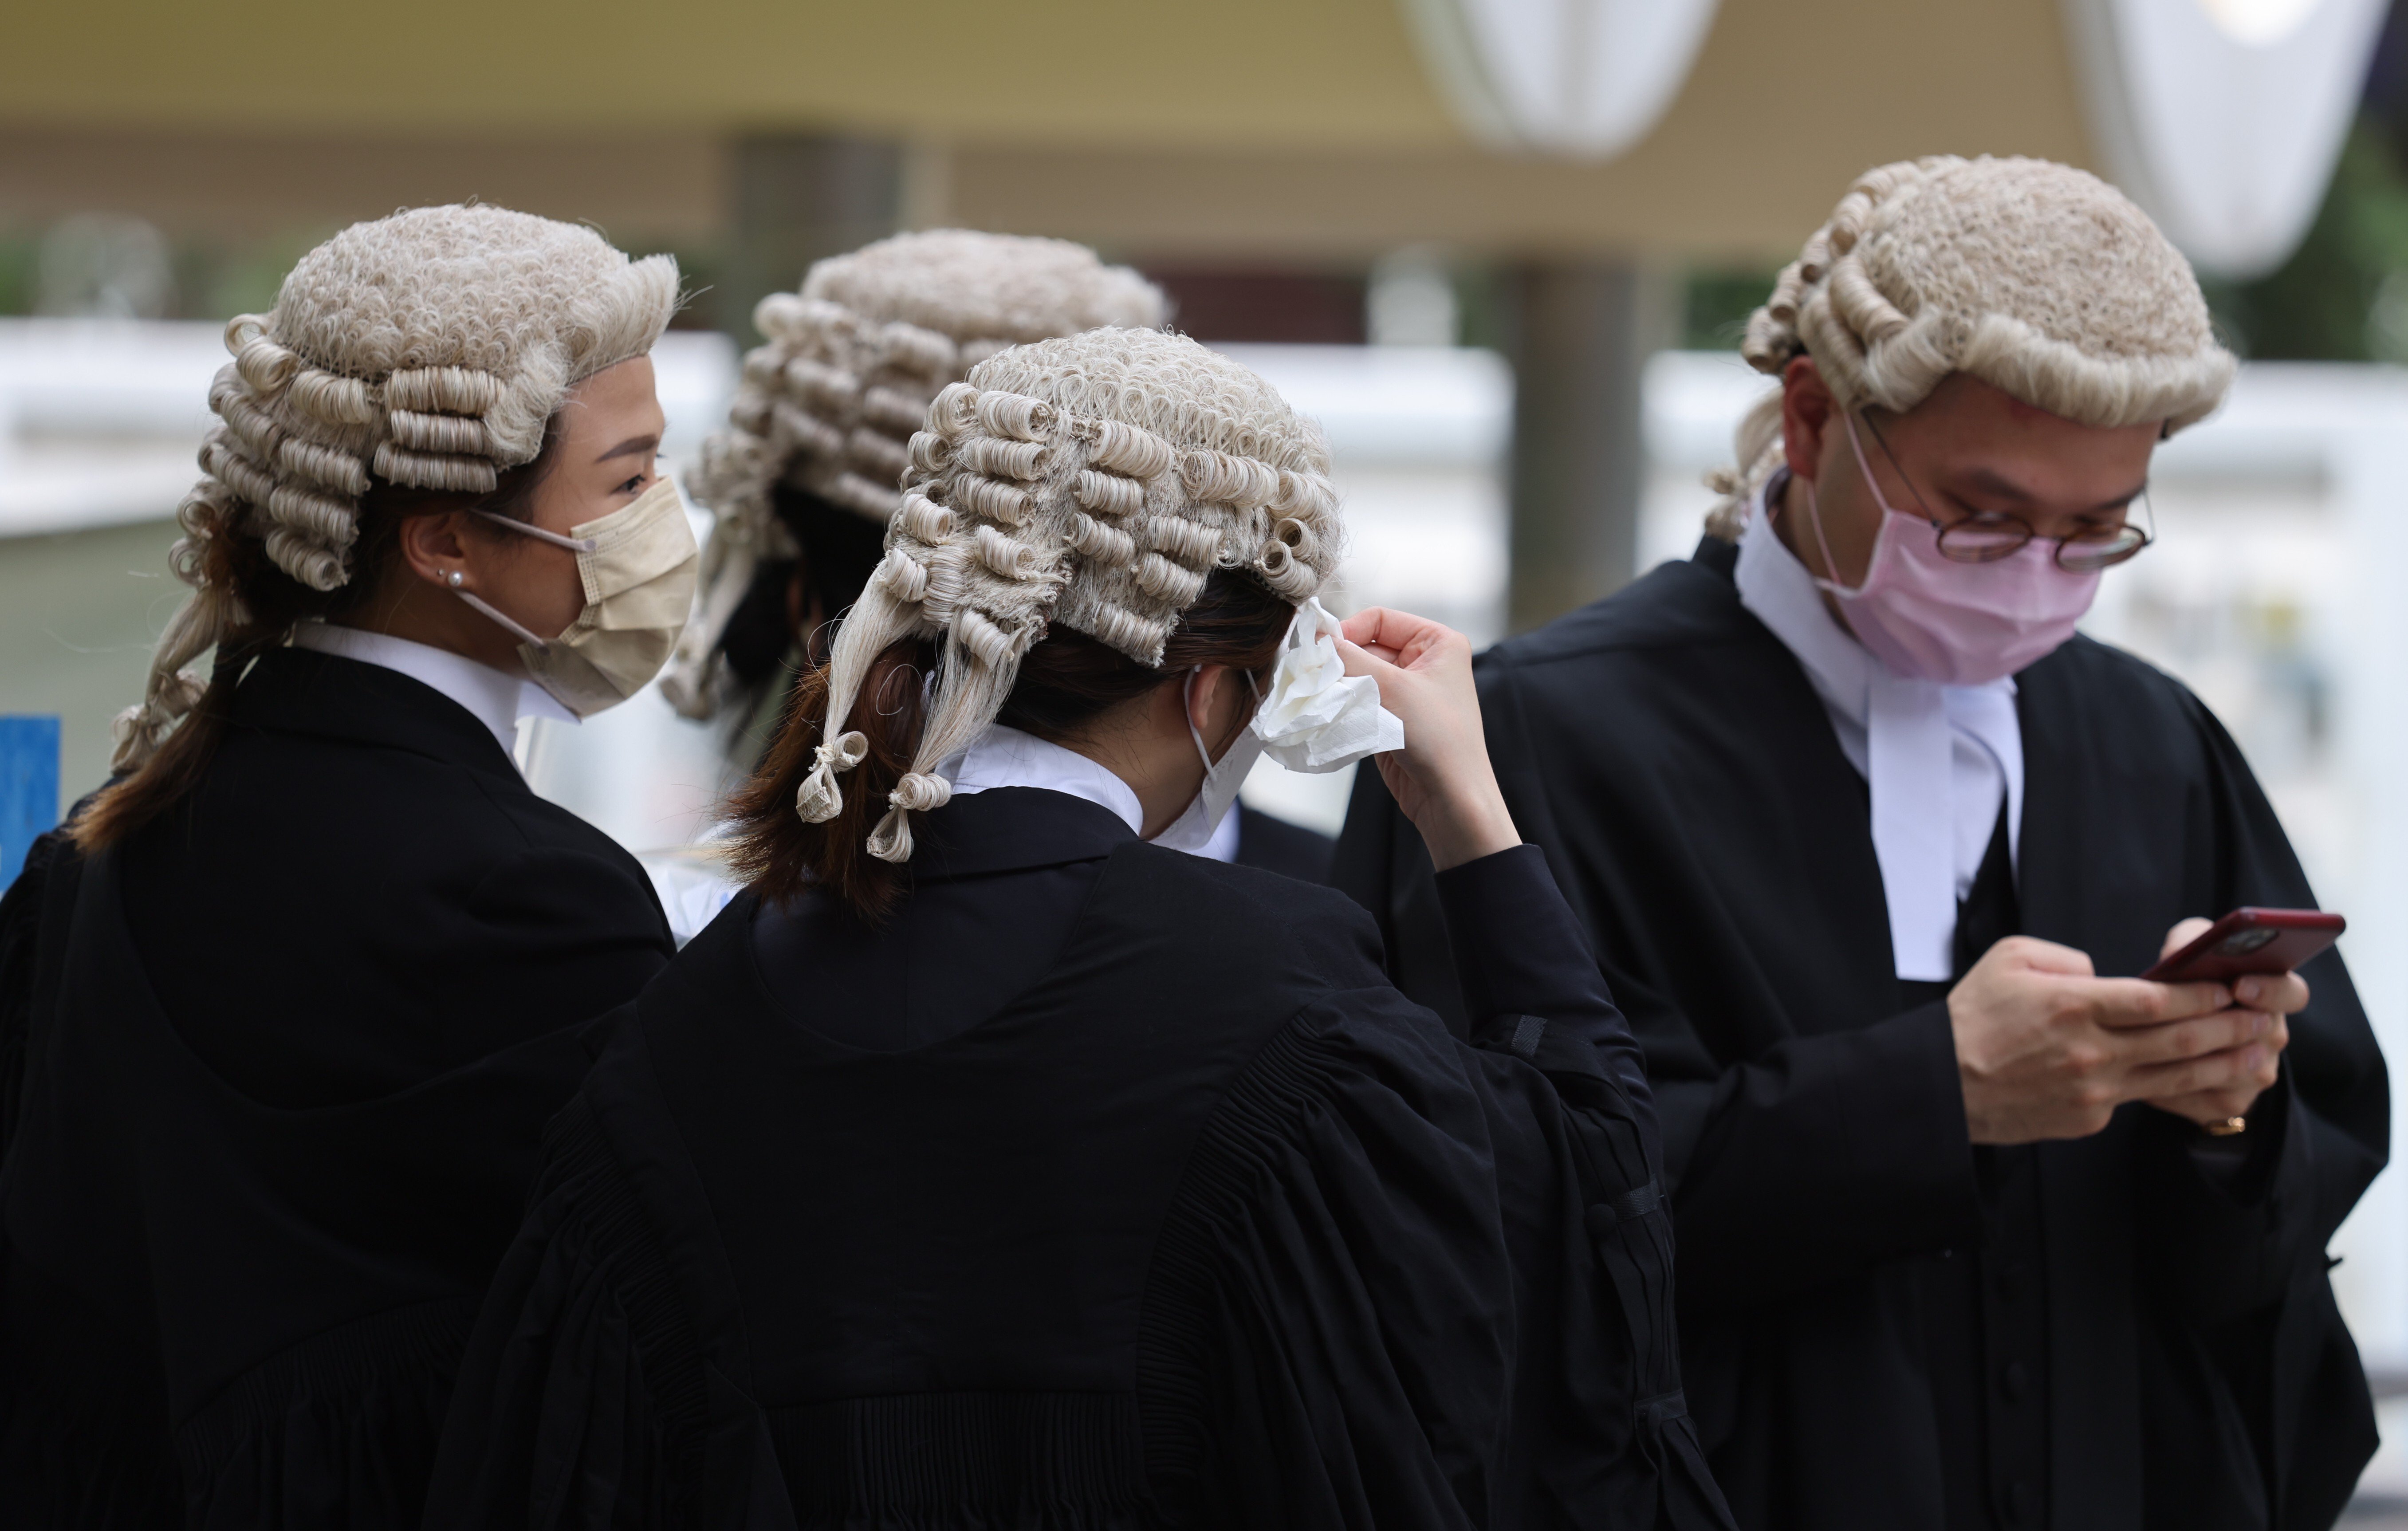 There are about 100 senior counsel in Hong Kong among some 1,500 practising barristers. Photo: Nora Tam